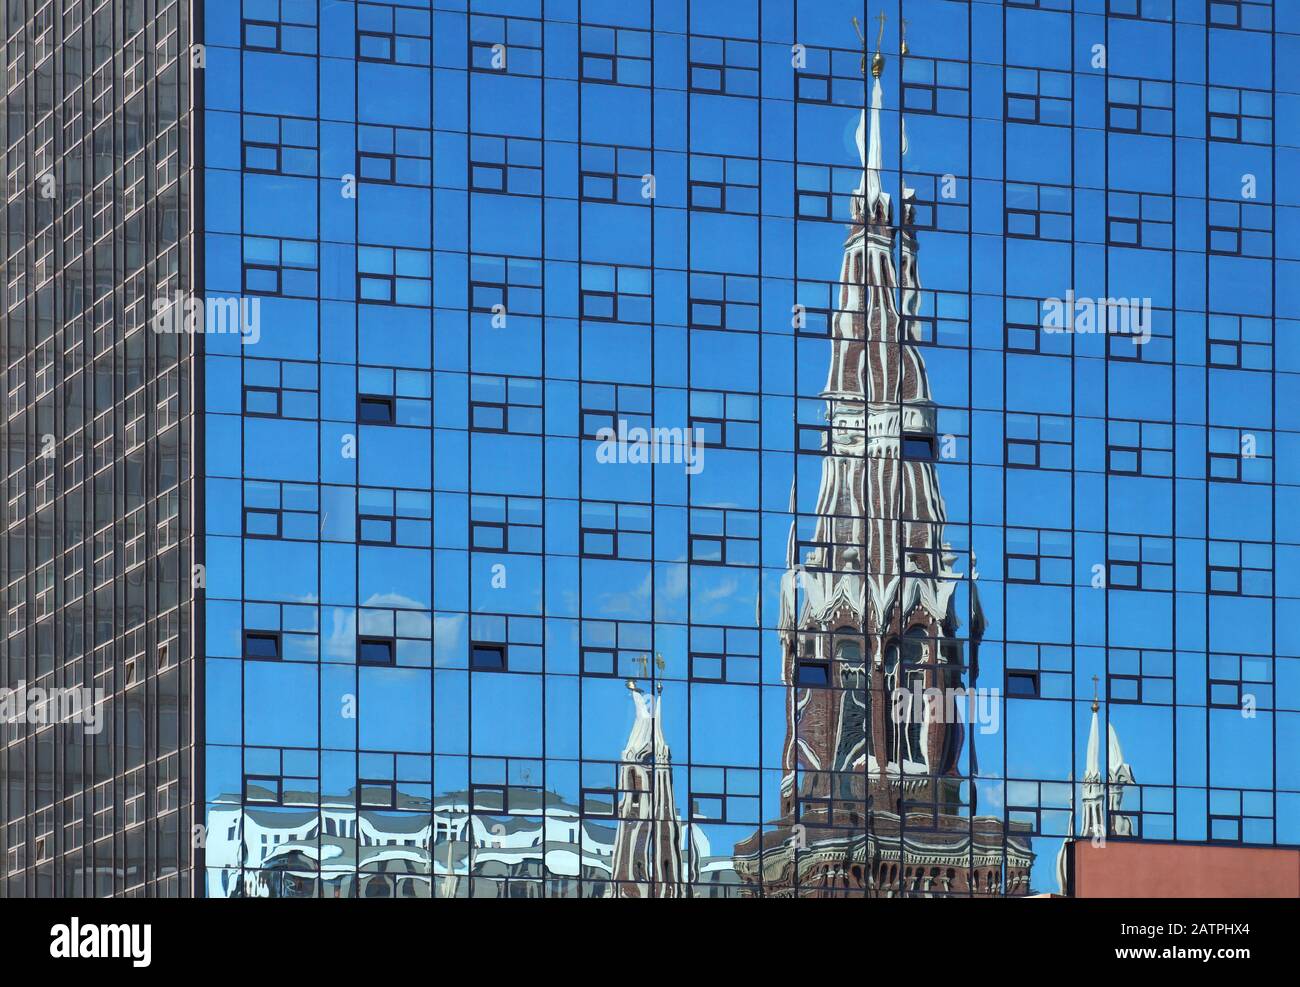 Old and new. Silhouette of a church reflecting in the facade of a modern building. Stock Photo